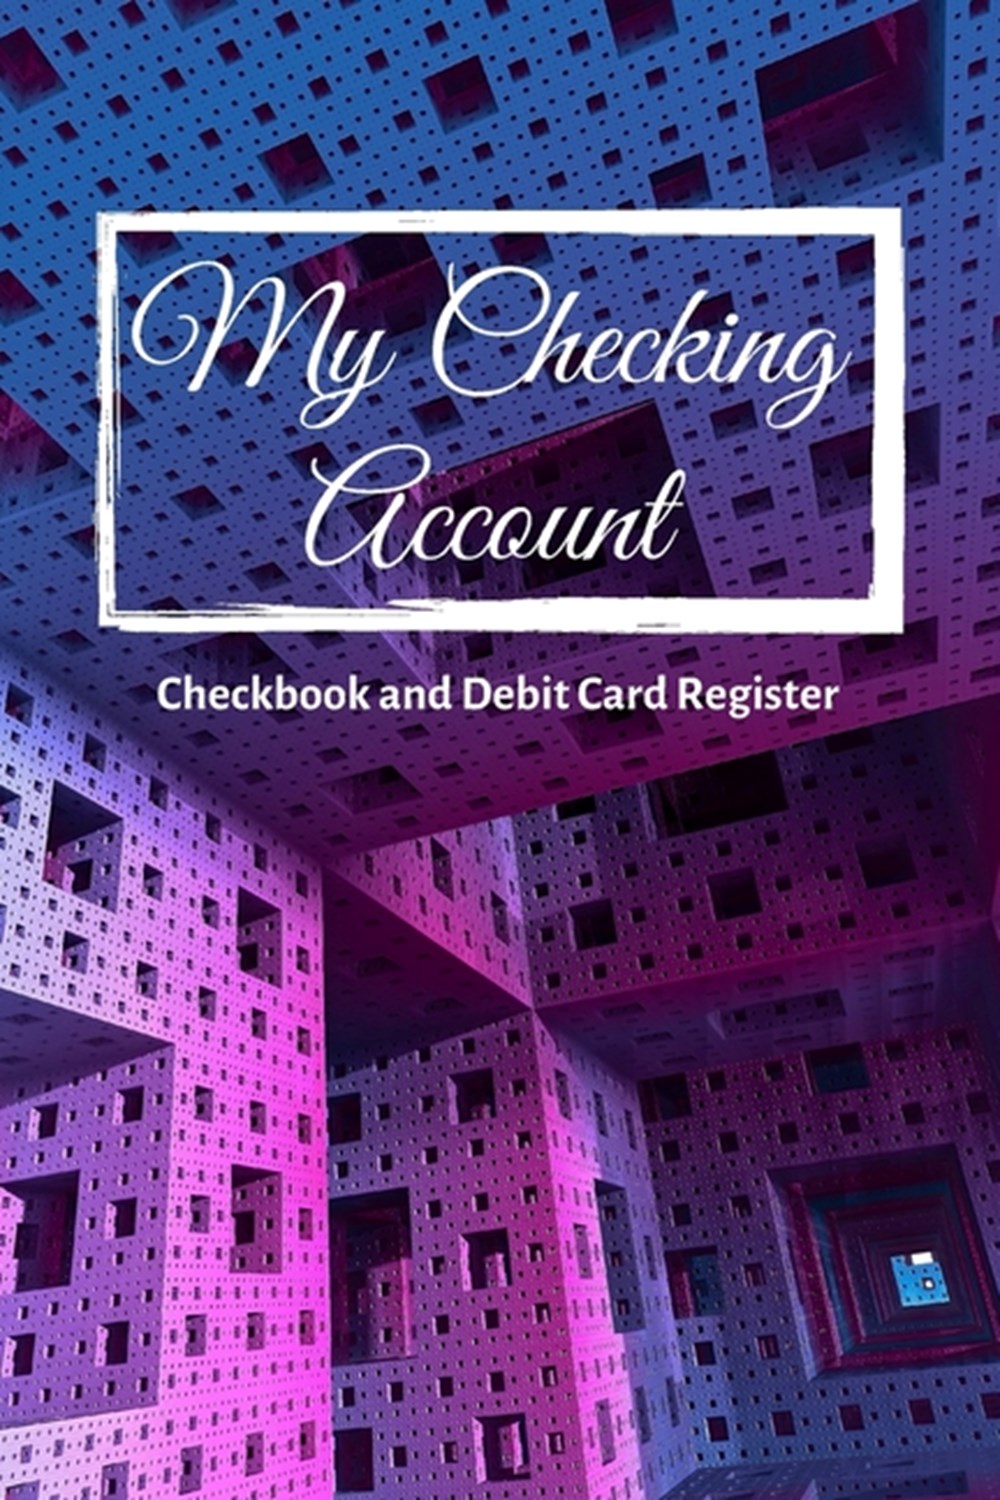 My Checking Account V.7 - Checkbook and Debit Card Register; Personal Checking Account Balance, Simp